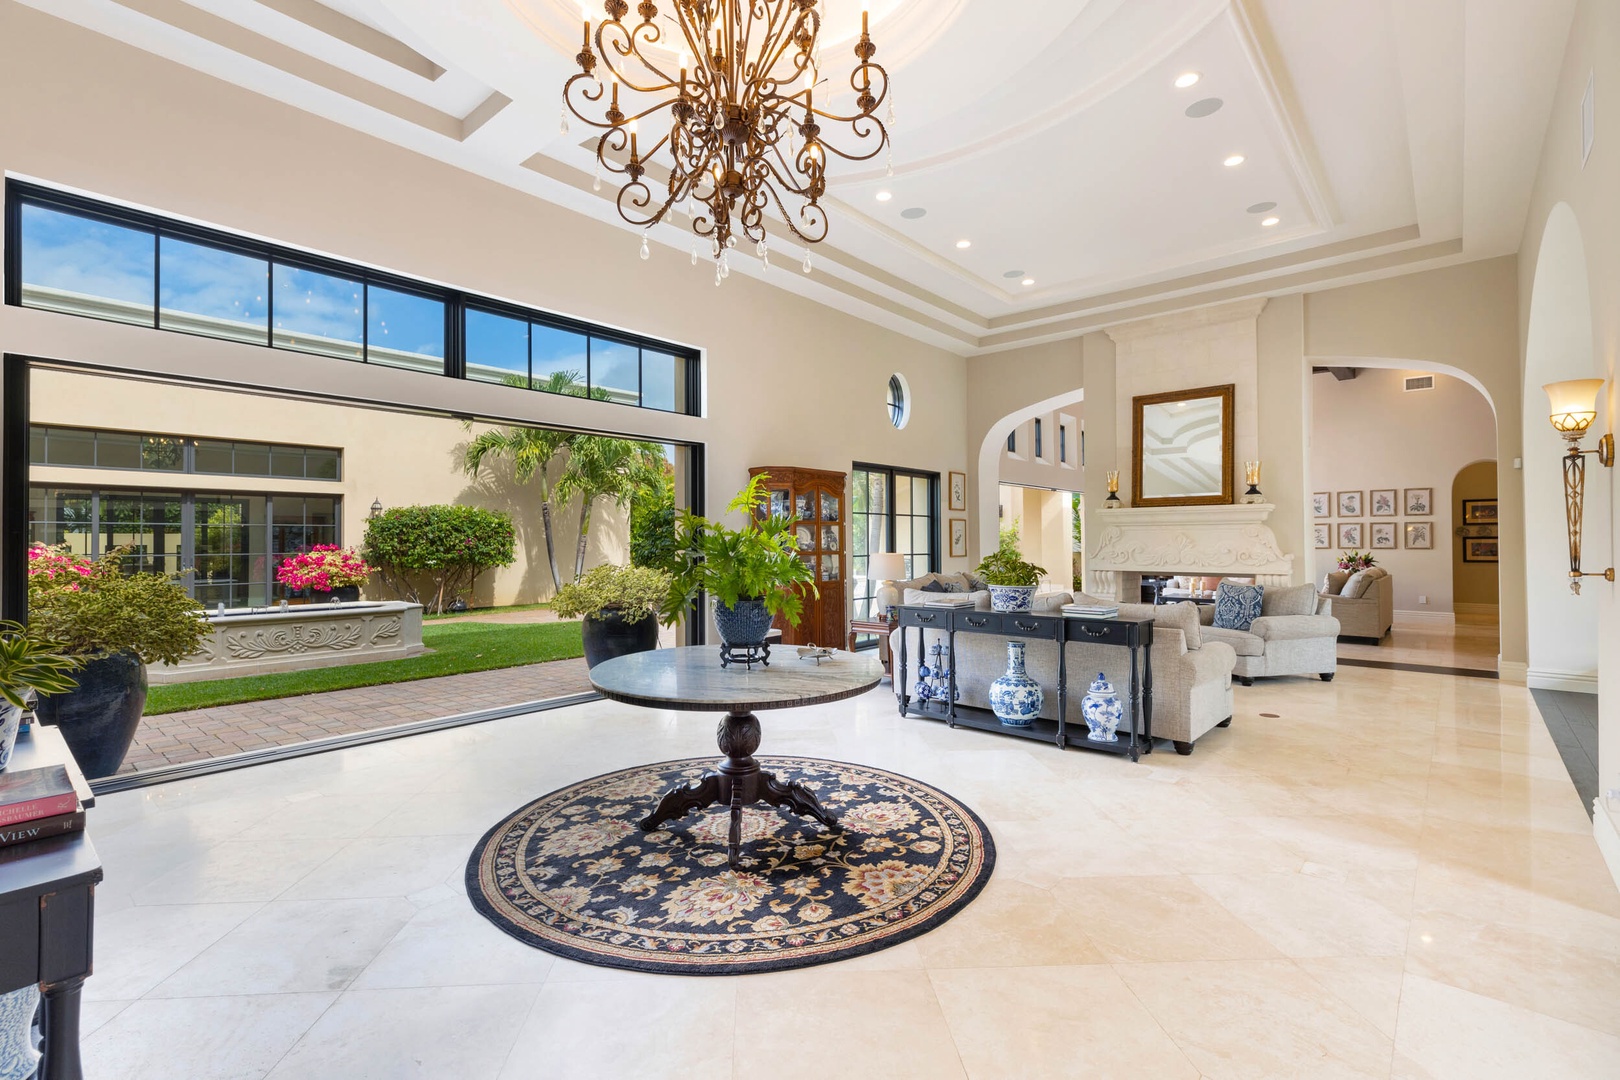 Honolulu Vacation Rentals, Royal Kahala Estate - Step into the elegantly appointed foyer.